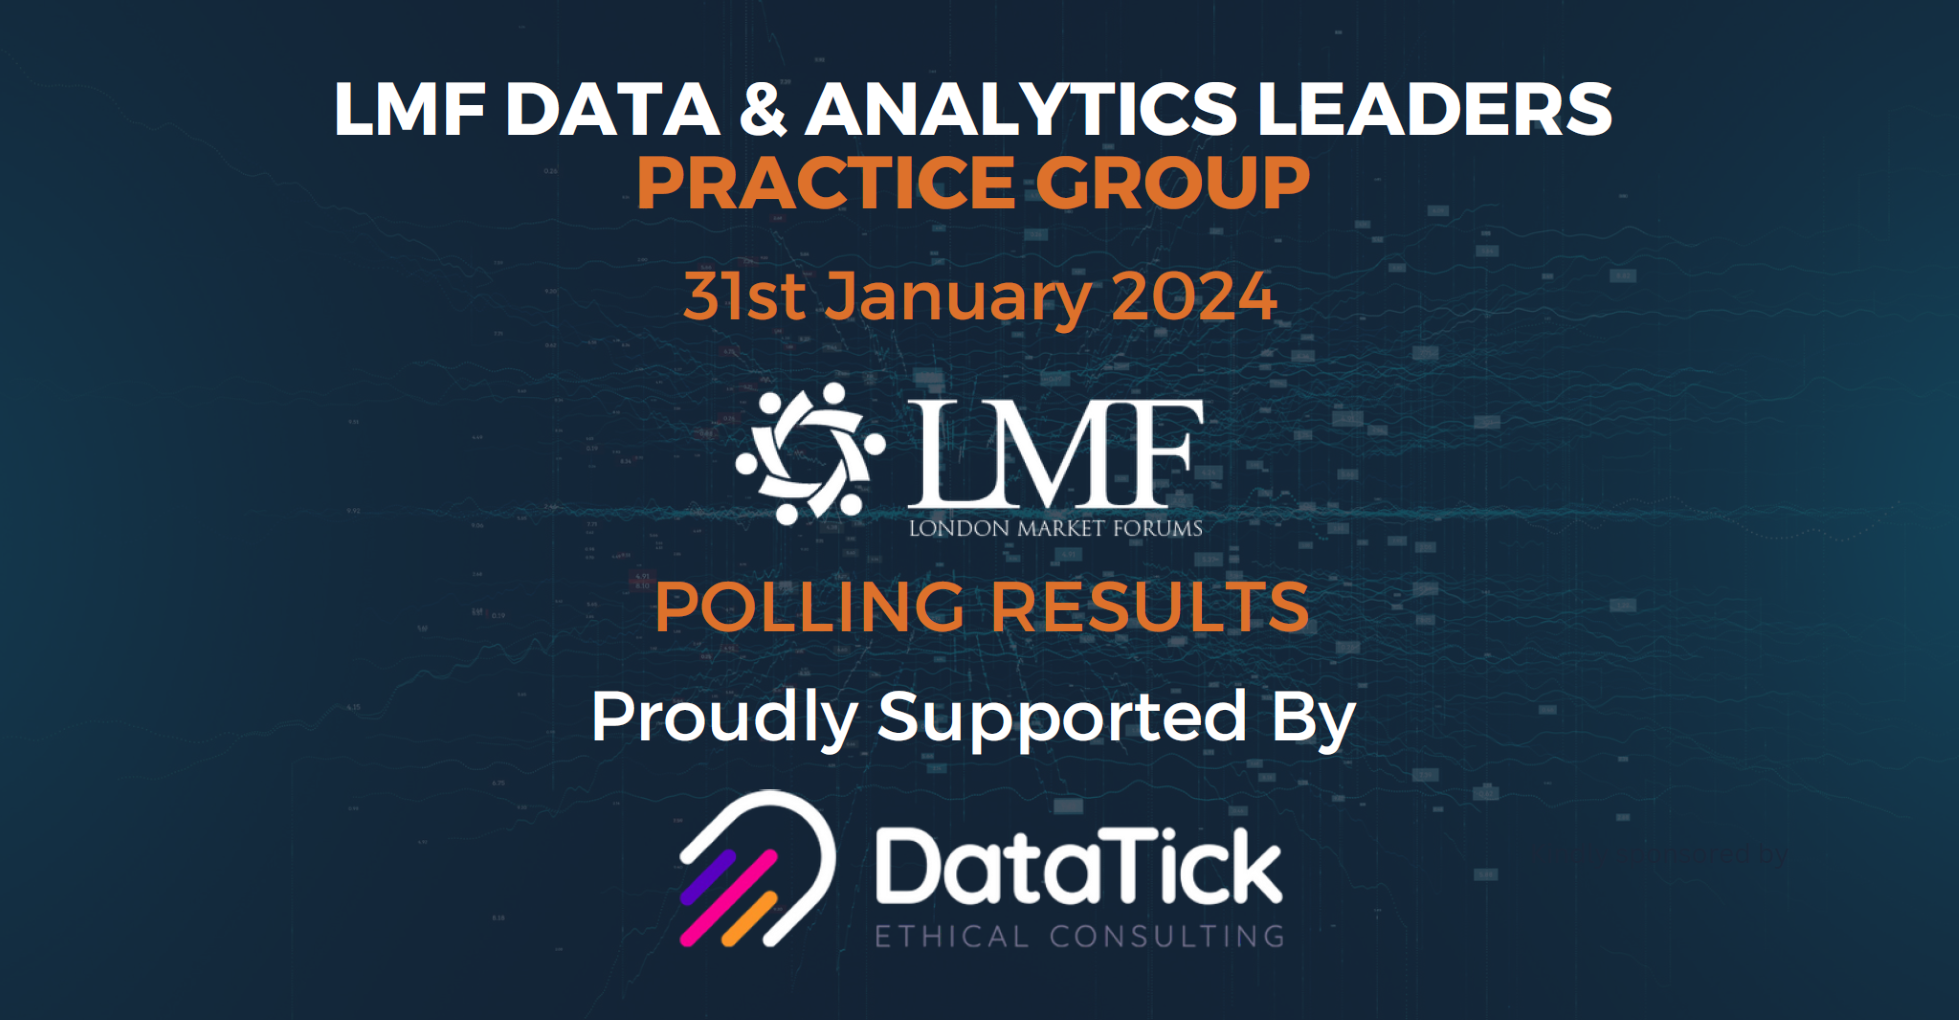 Data & Analytics Leaders PG Polling Results